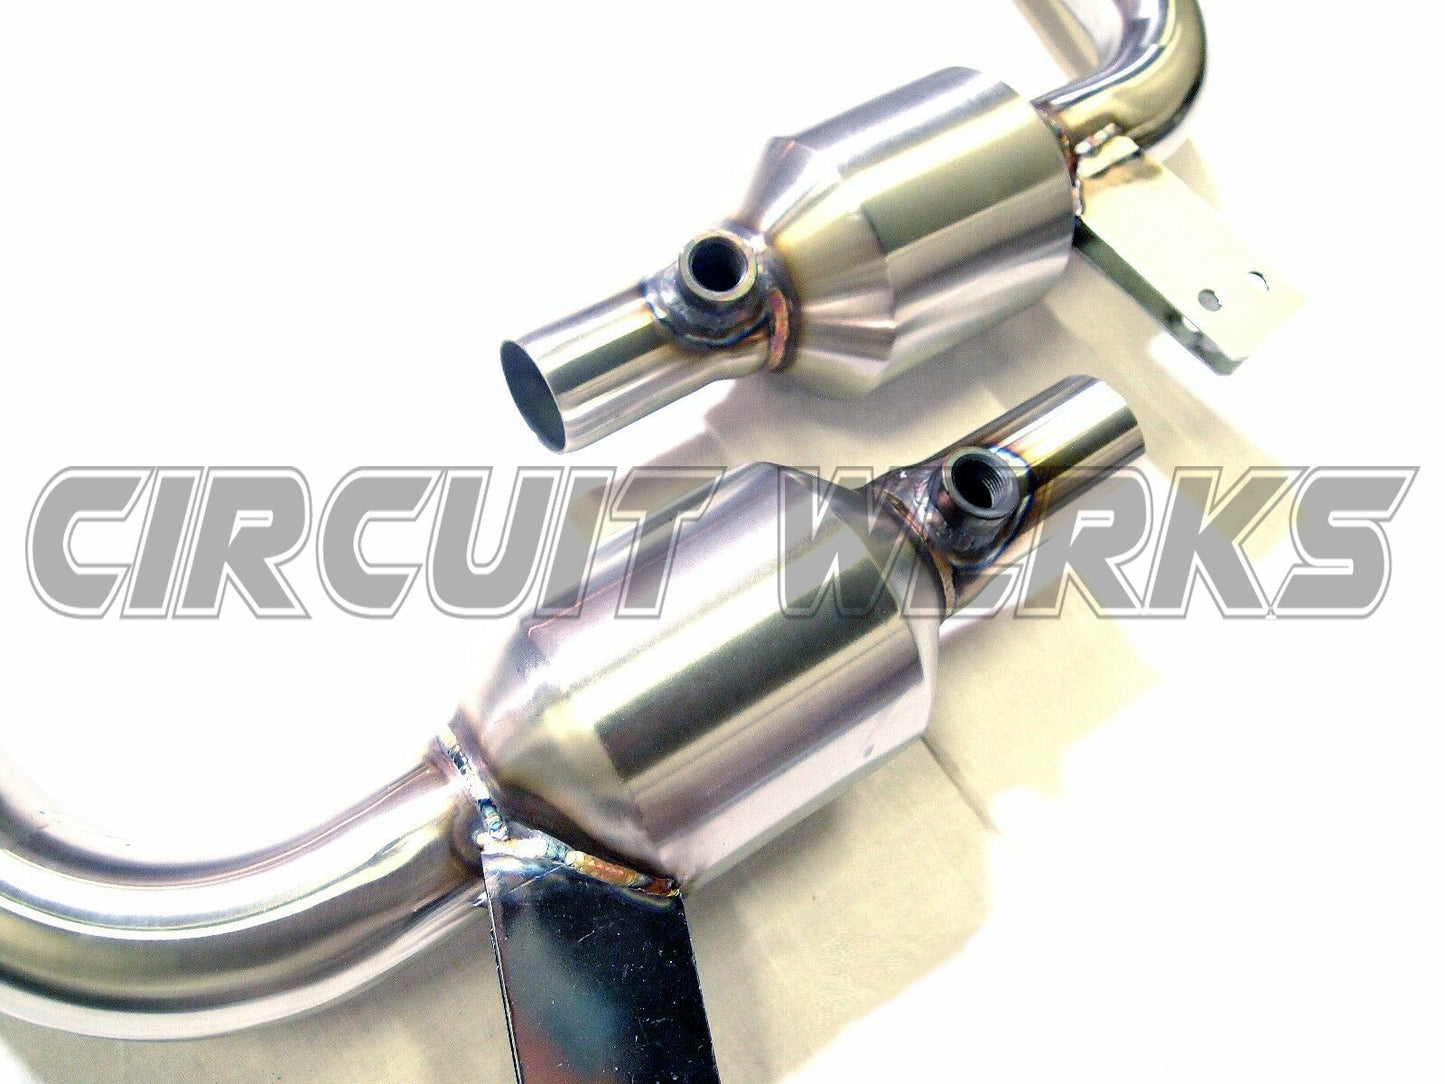 2000-2004 Porsche Boxster 986 2.7/3.2L High Flow Catted Test Pipes